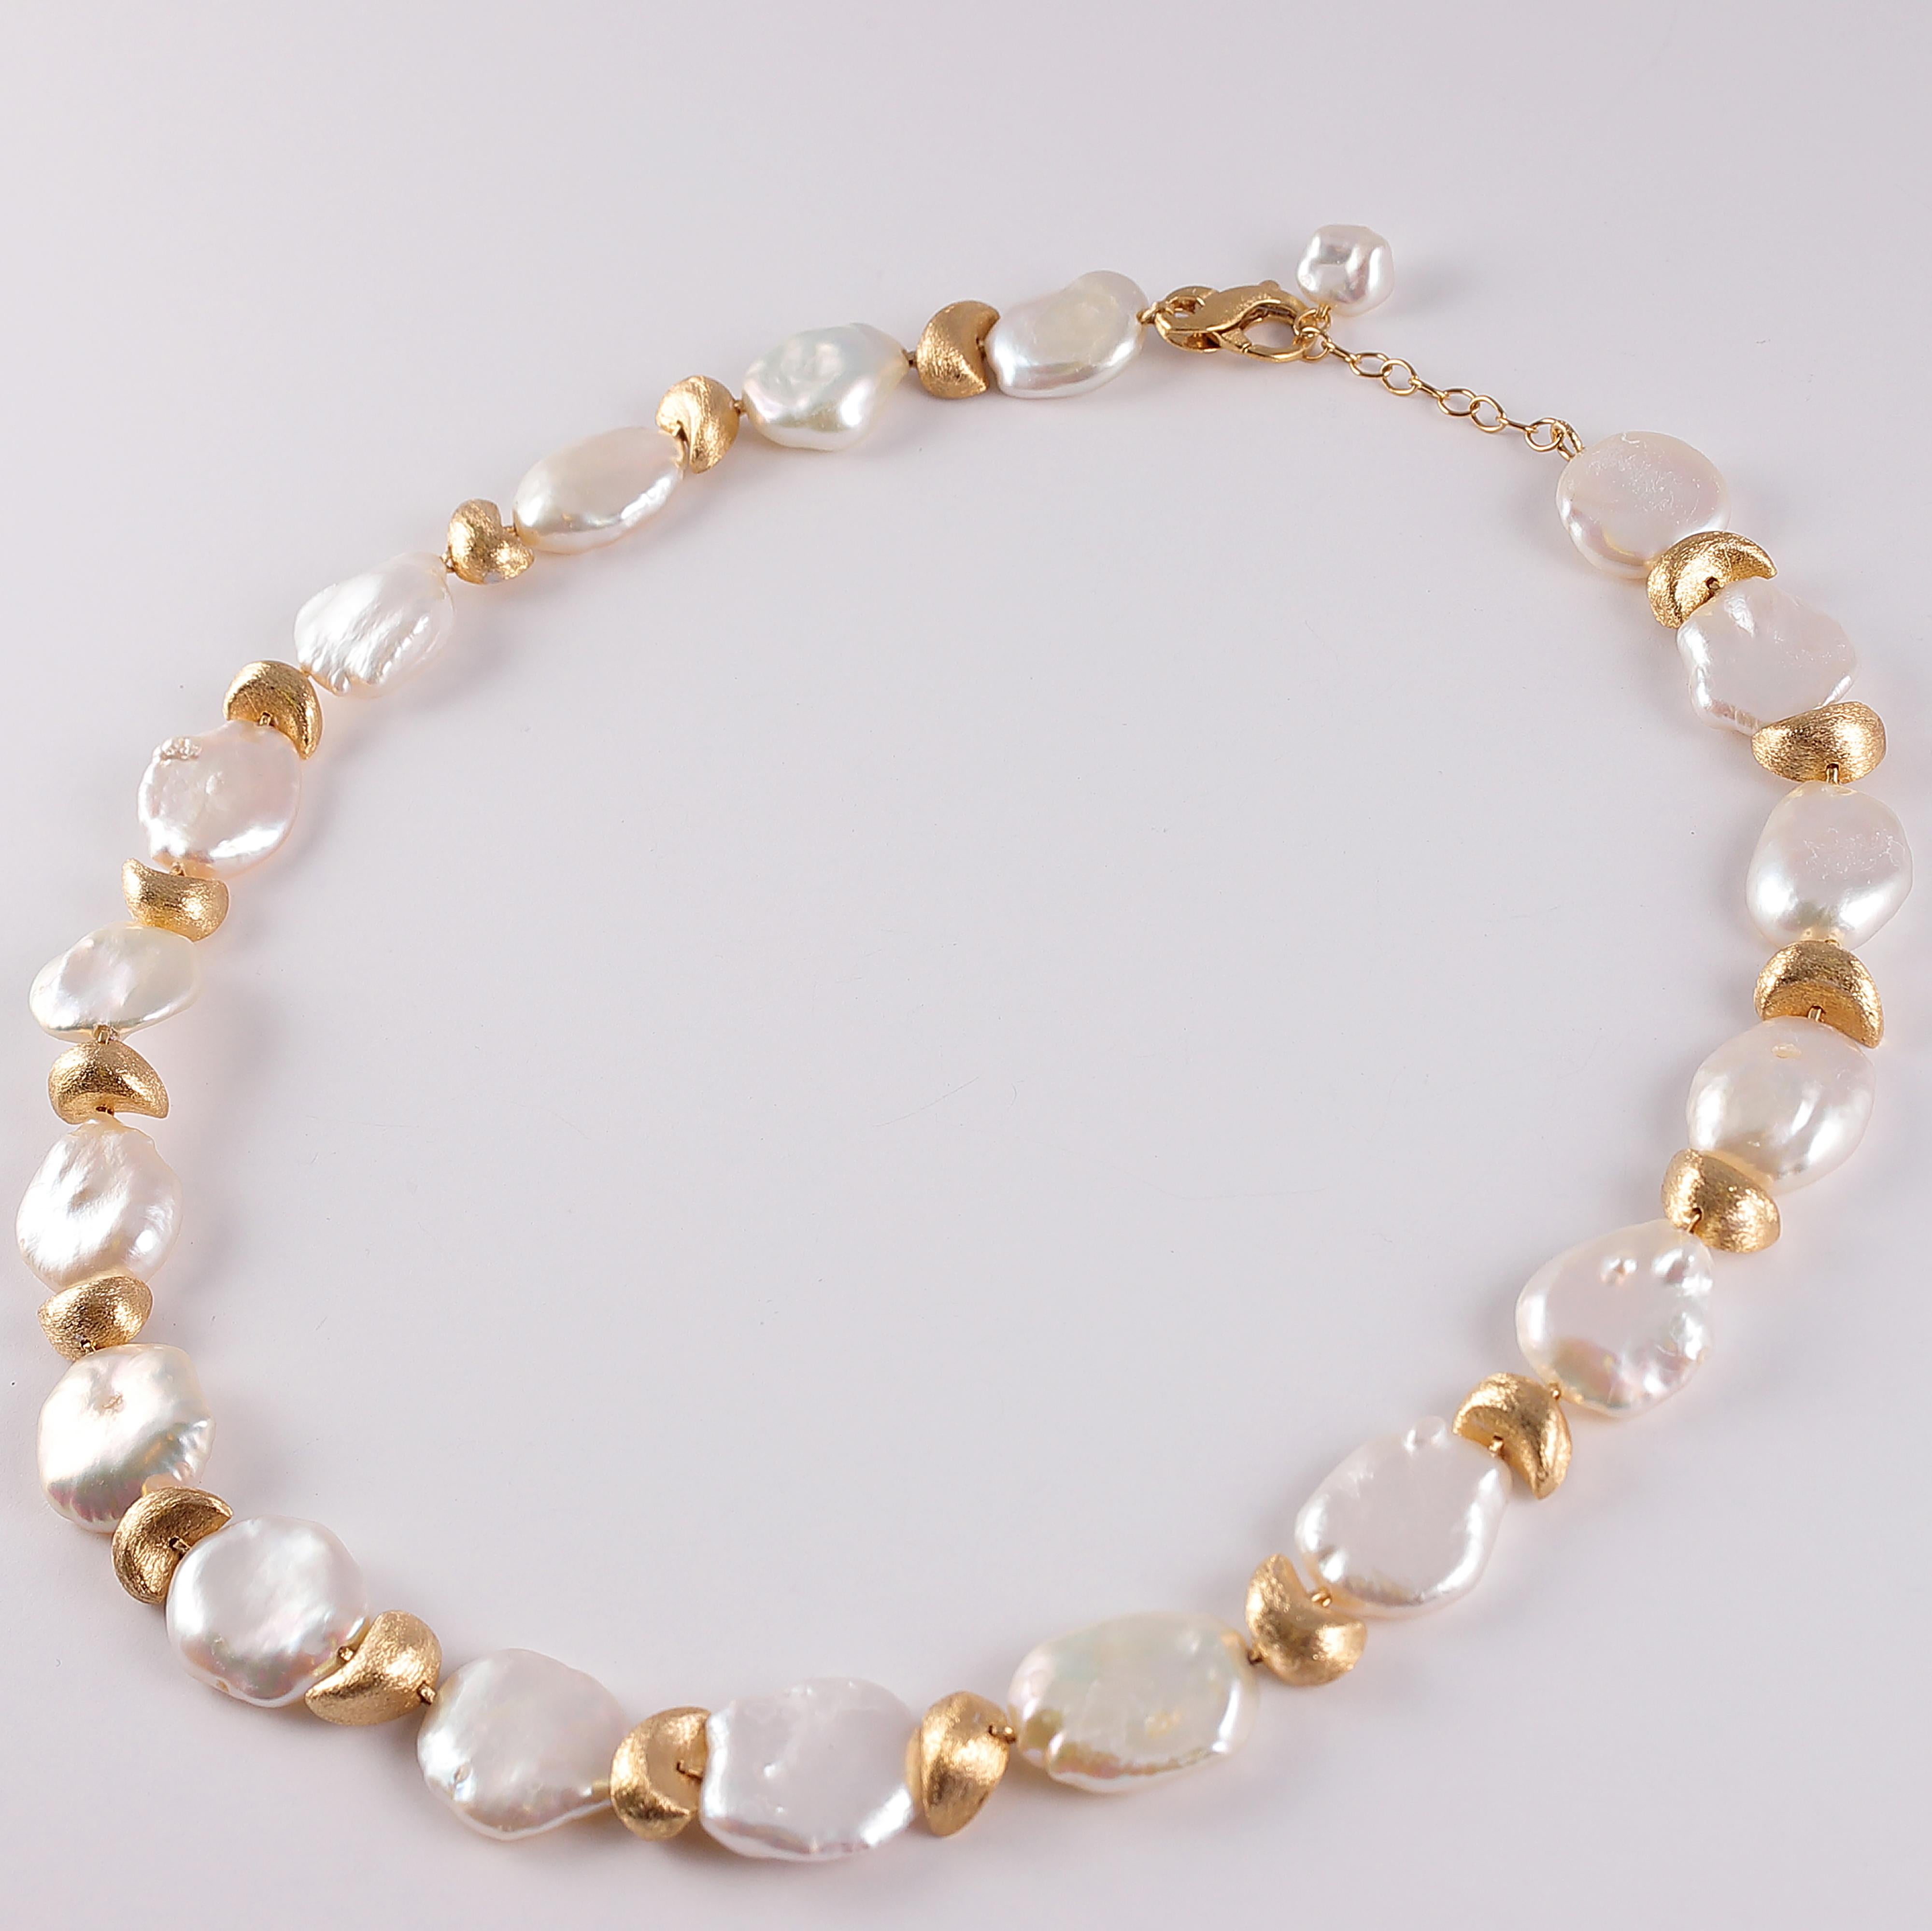 Women's or Men's Yvel Keshi Pearl Yellow Gold Necklace from the Satin Finish Collection